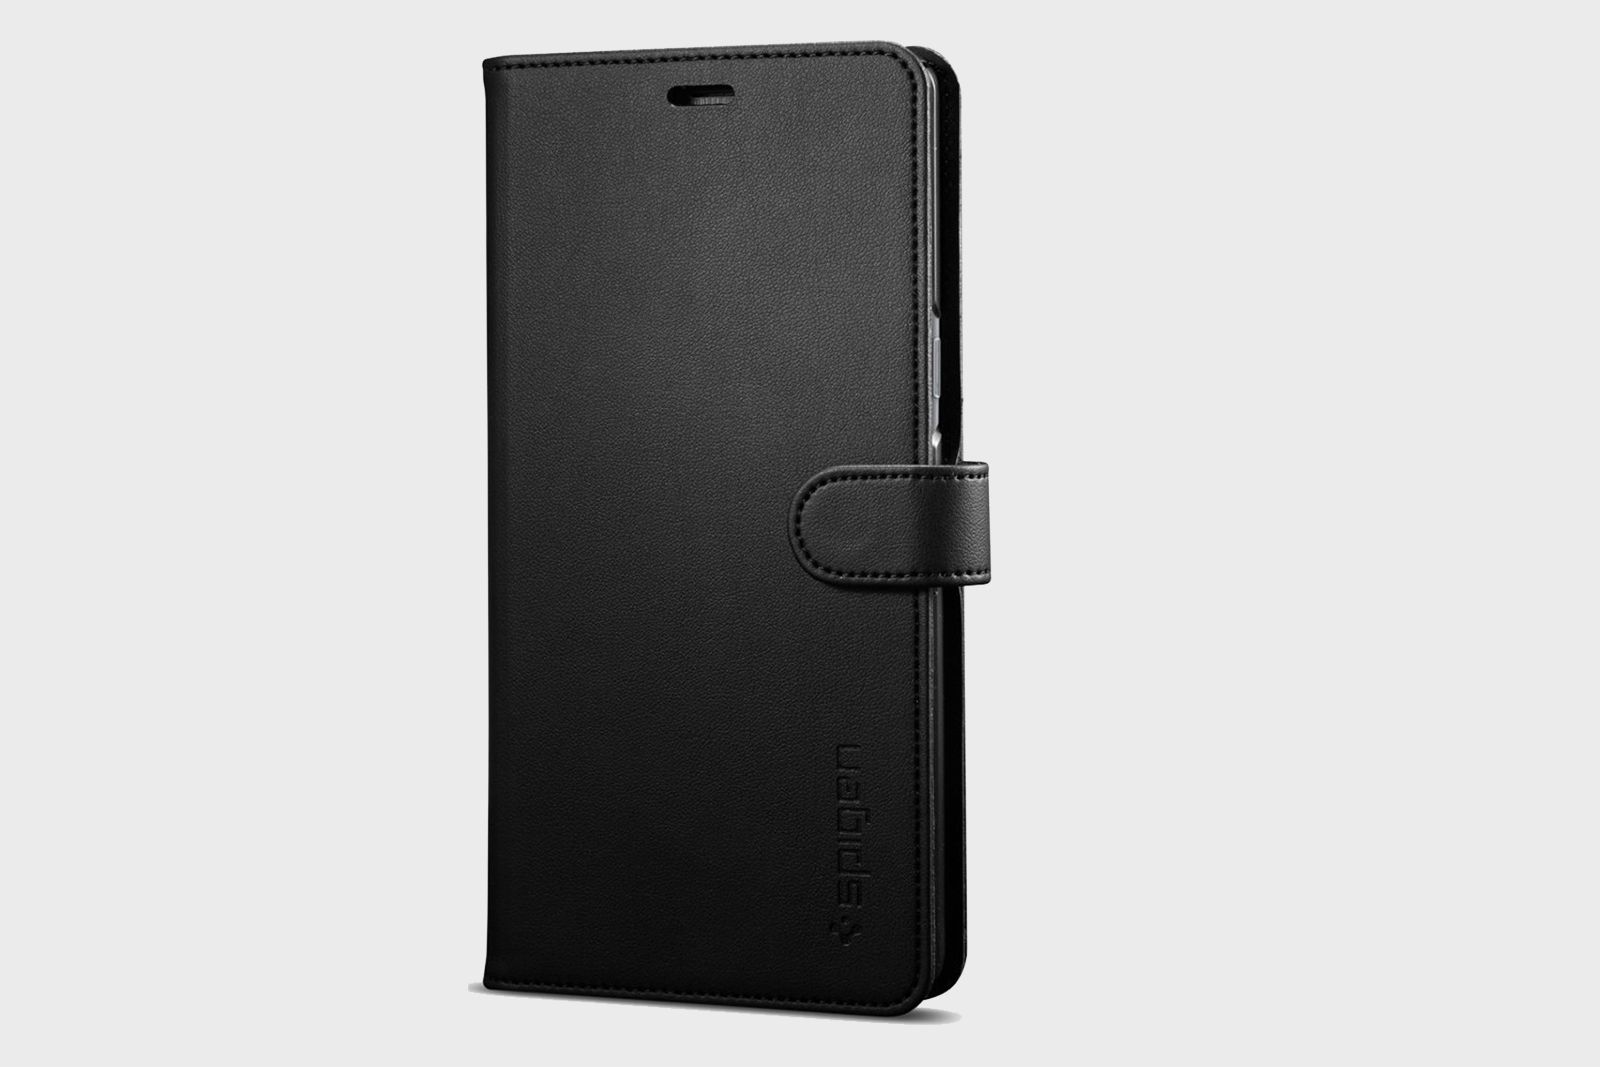 Best Samsung Galaxy Note 8 cases Protect your new 63-inch phablet image 5